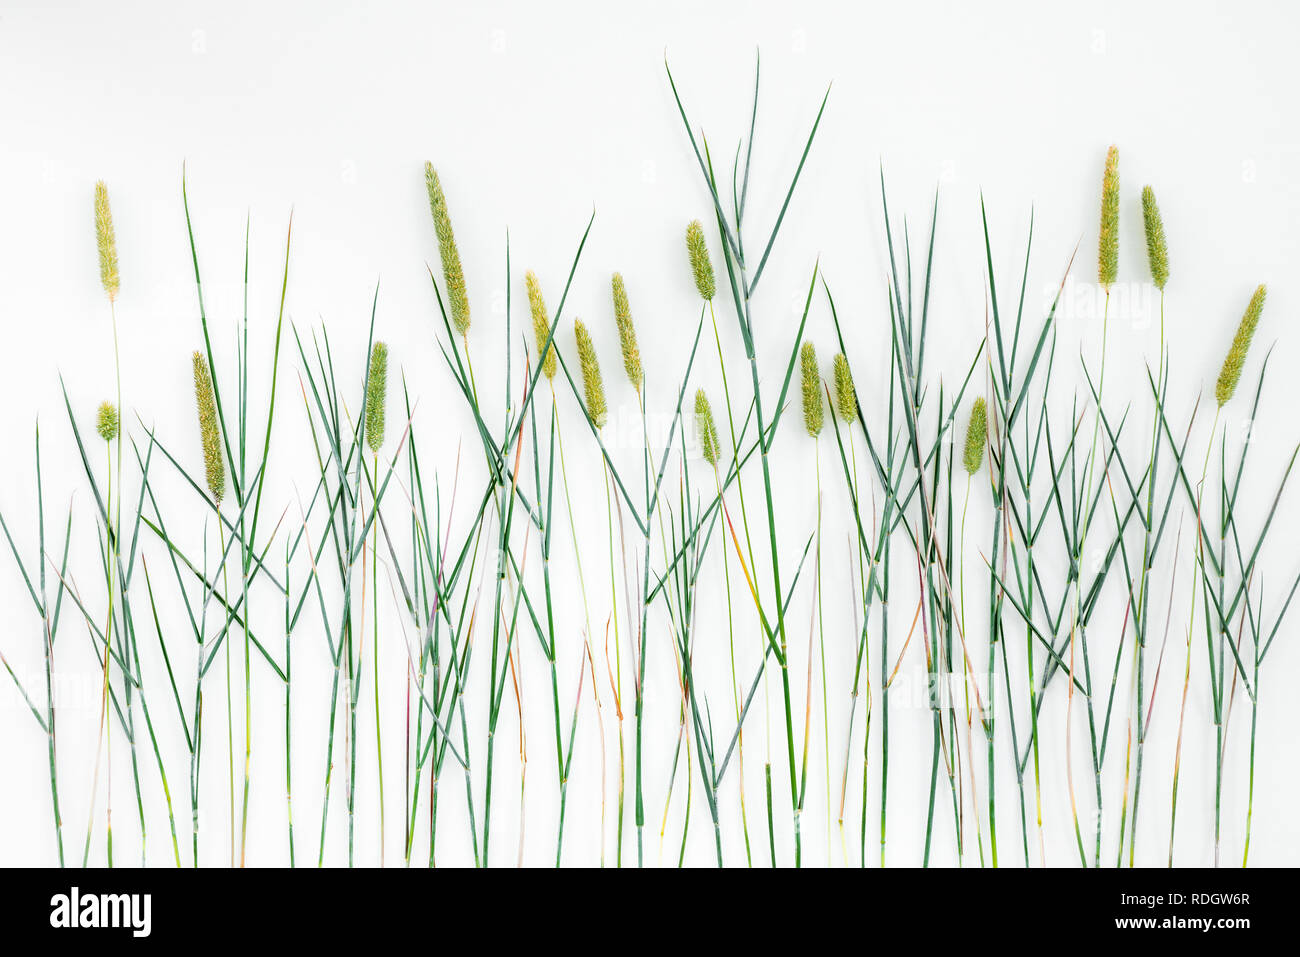 Close-up of Timothy grass (Phleum Pratense) on white background. Wild grass with seed heads. Stock Photo